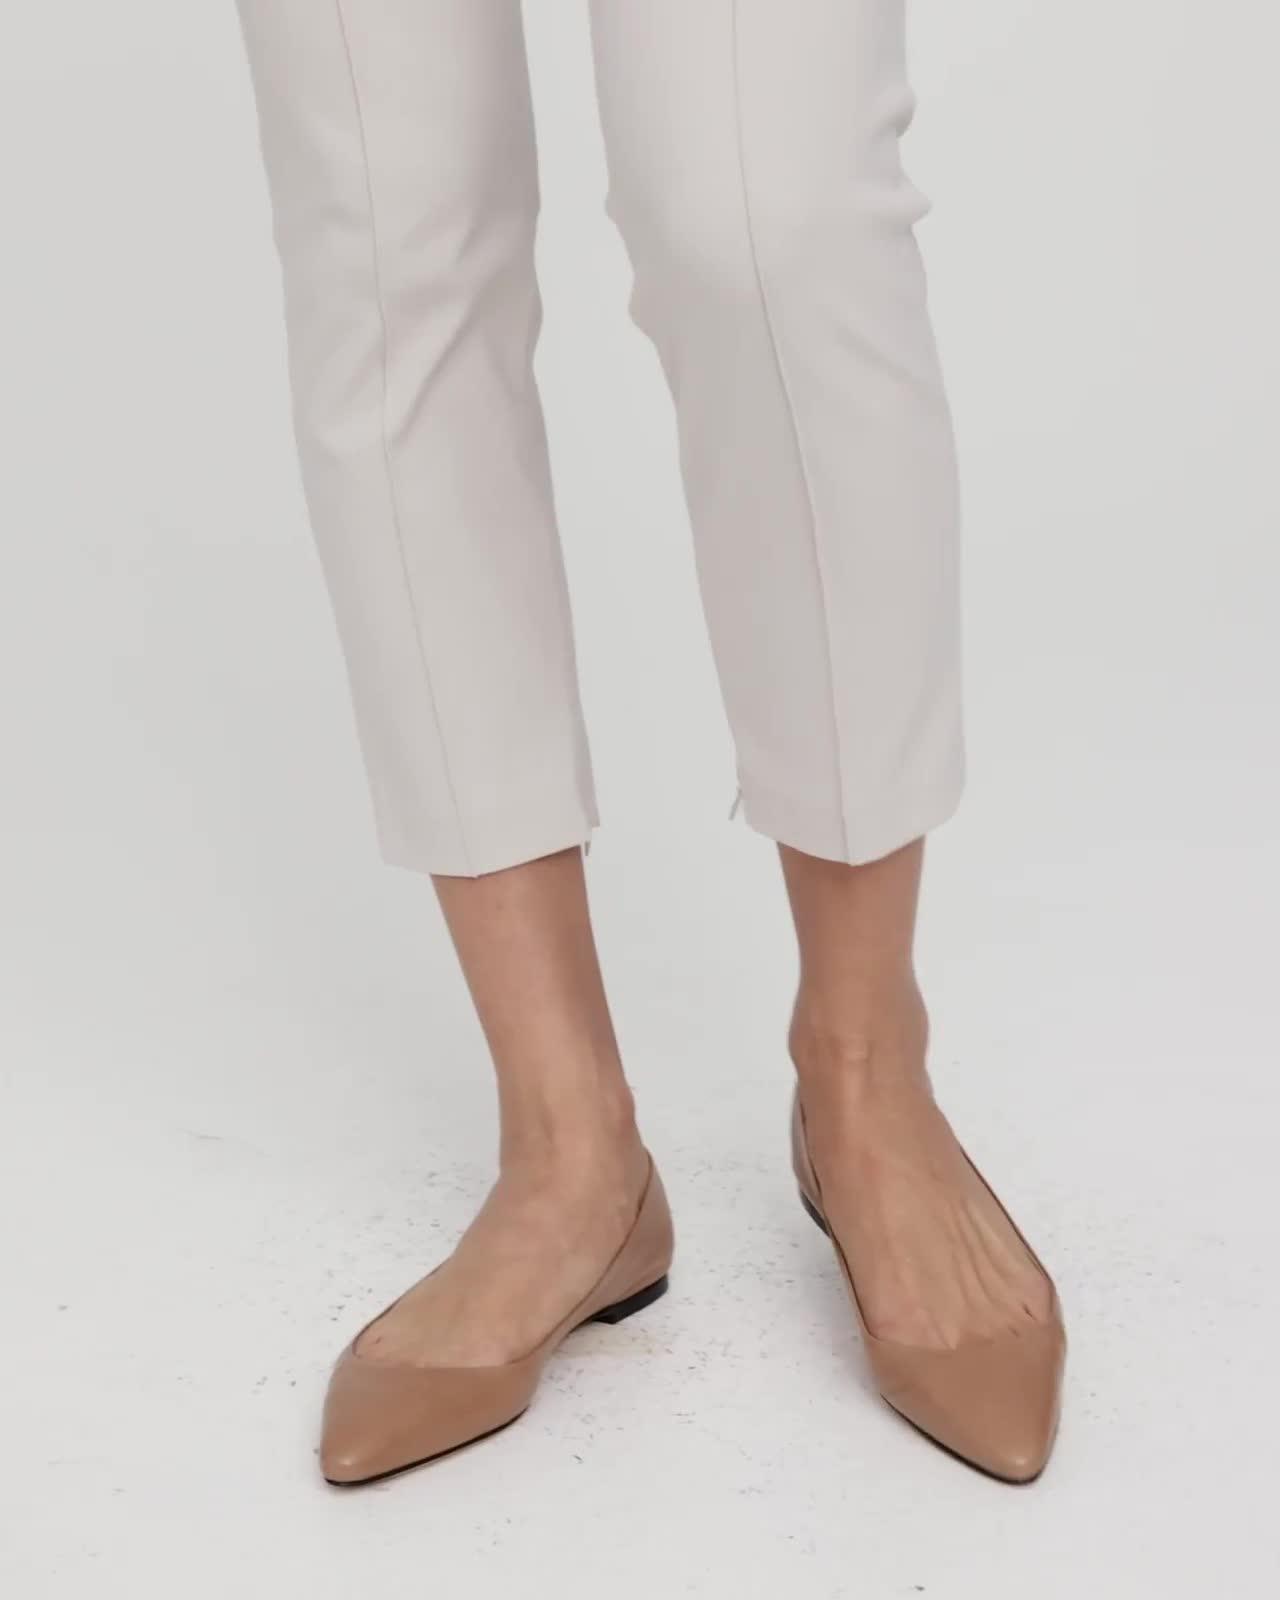 Pintucked Slim Pant in Stretch Cotton